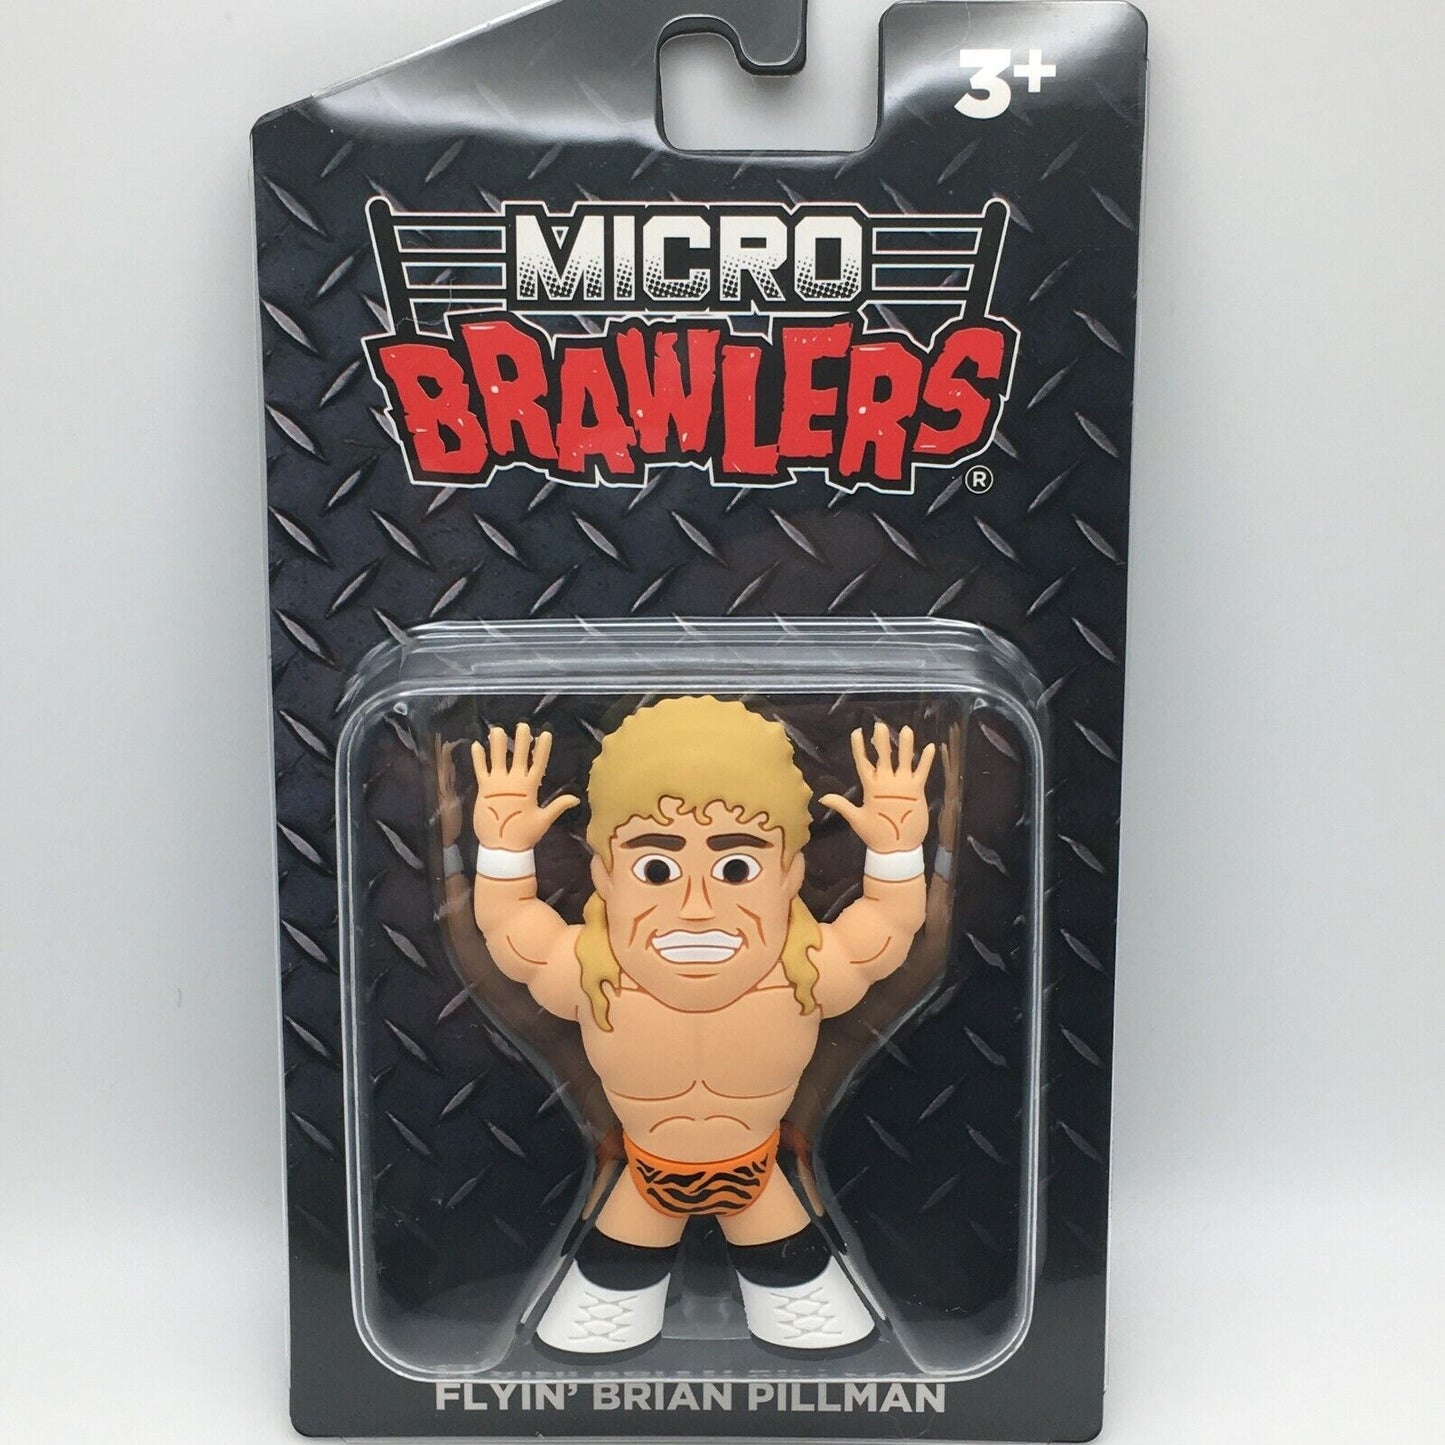 2021 Pro Wrestling Tees Crate Exclusive Micro Brawlers Flyin' Brian Pillman [July]